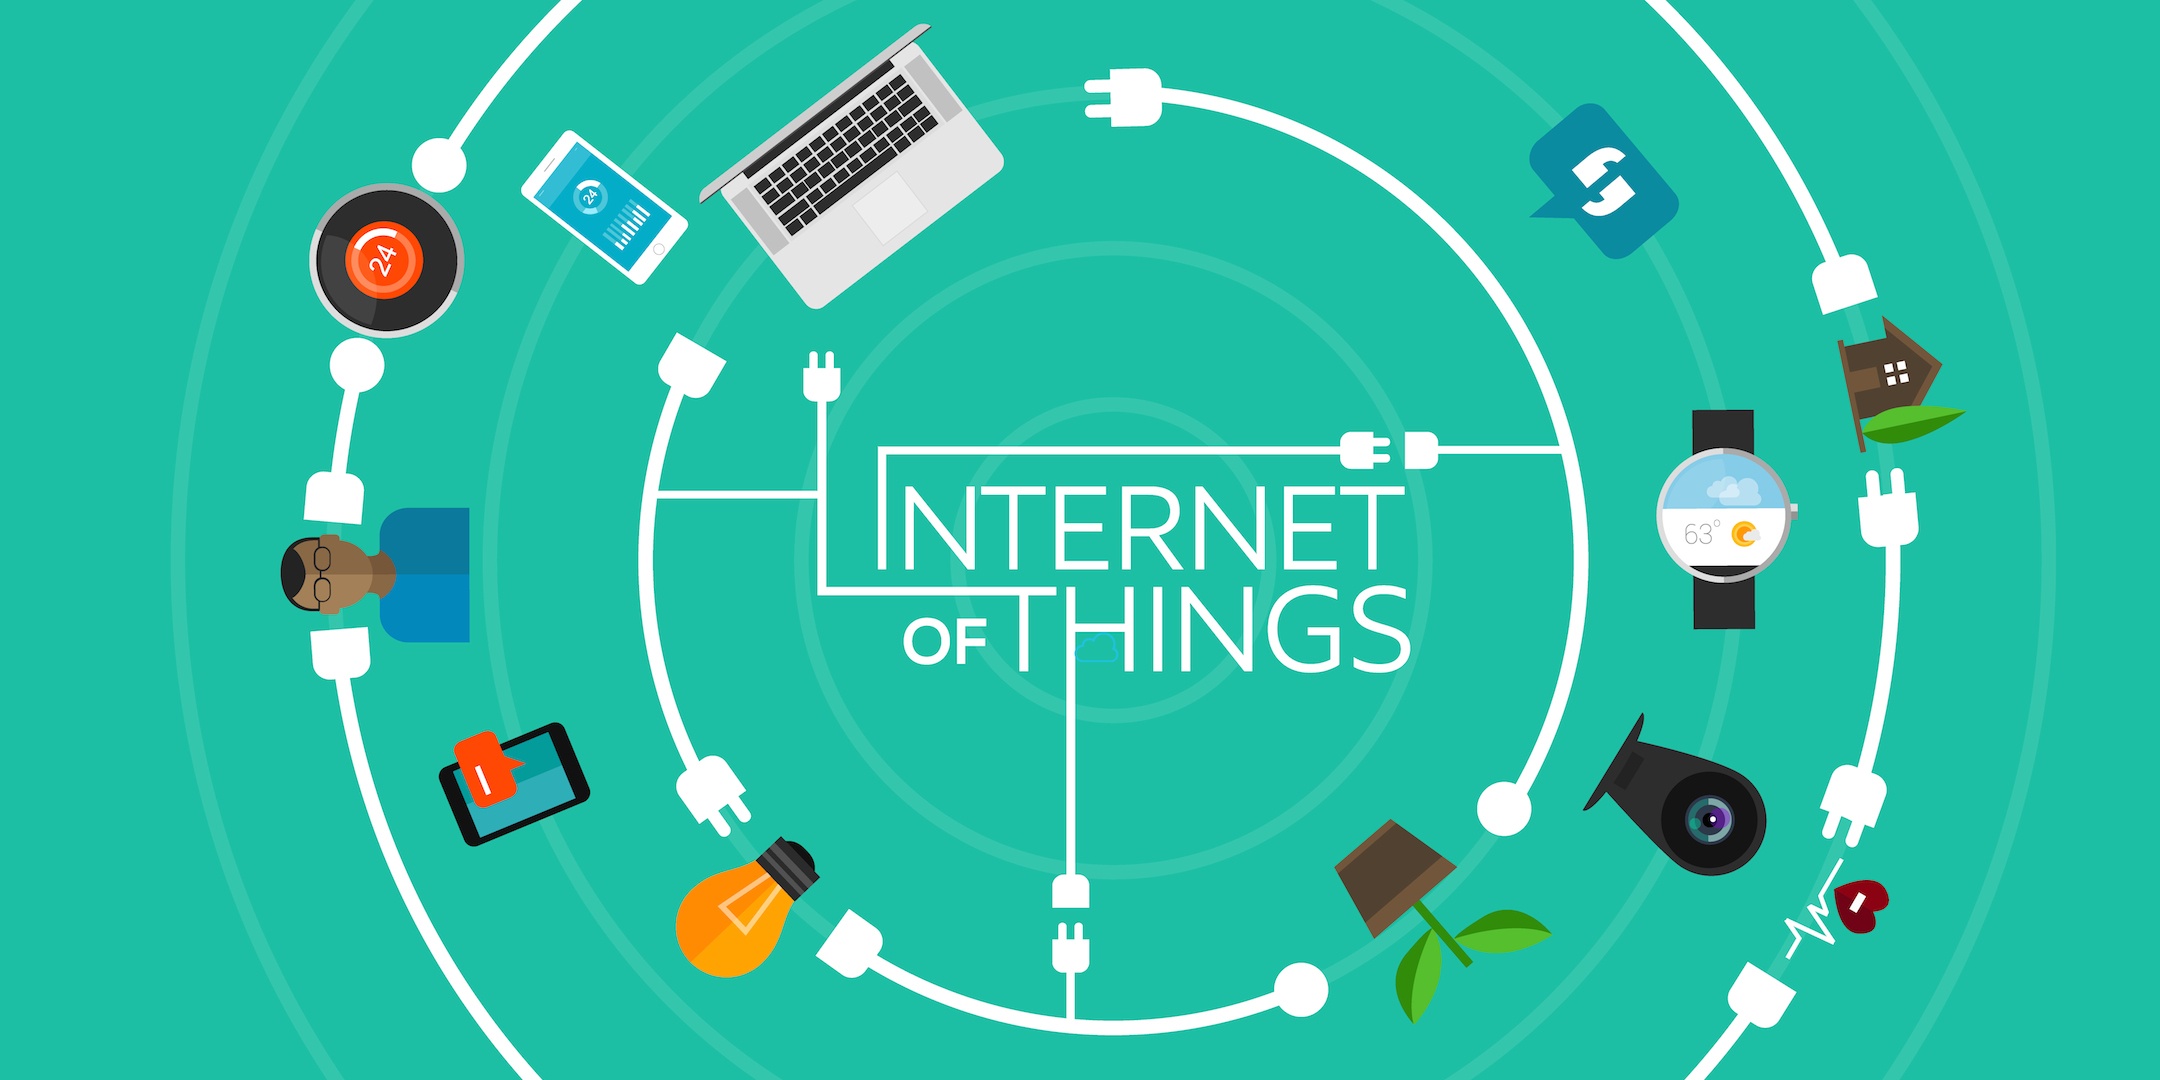 4 Best Uses of IoT in Banking and Finance